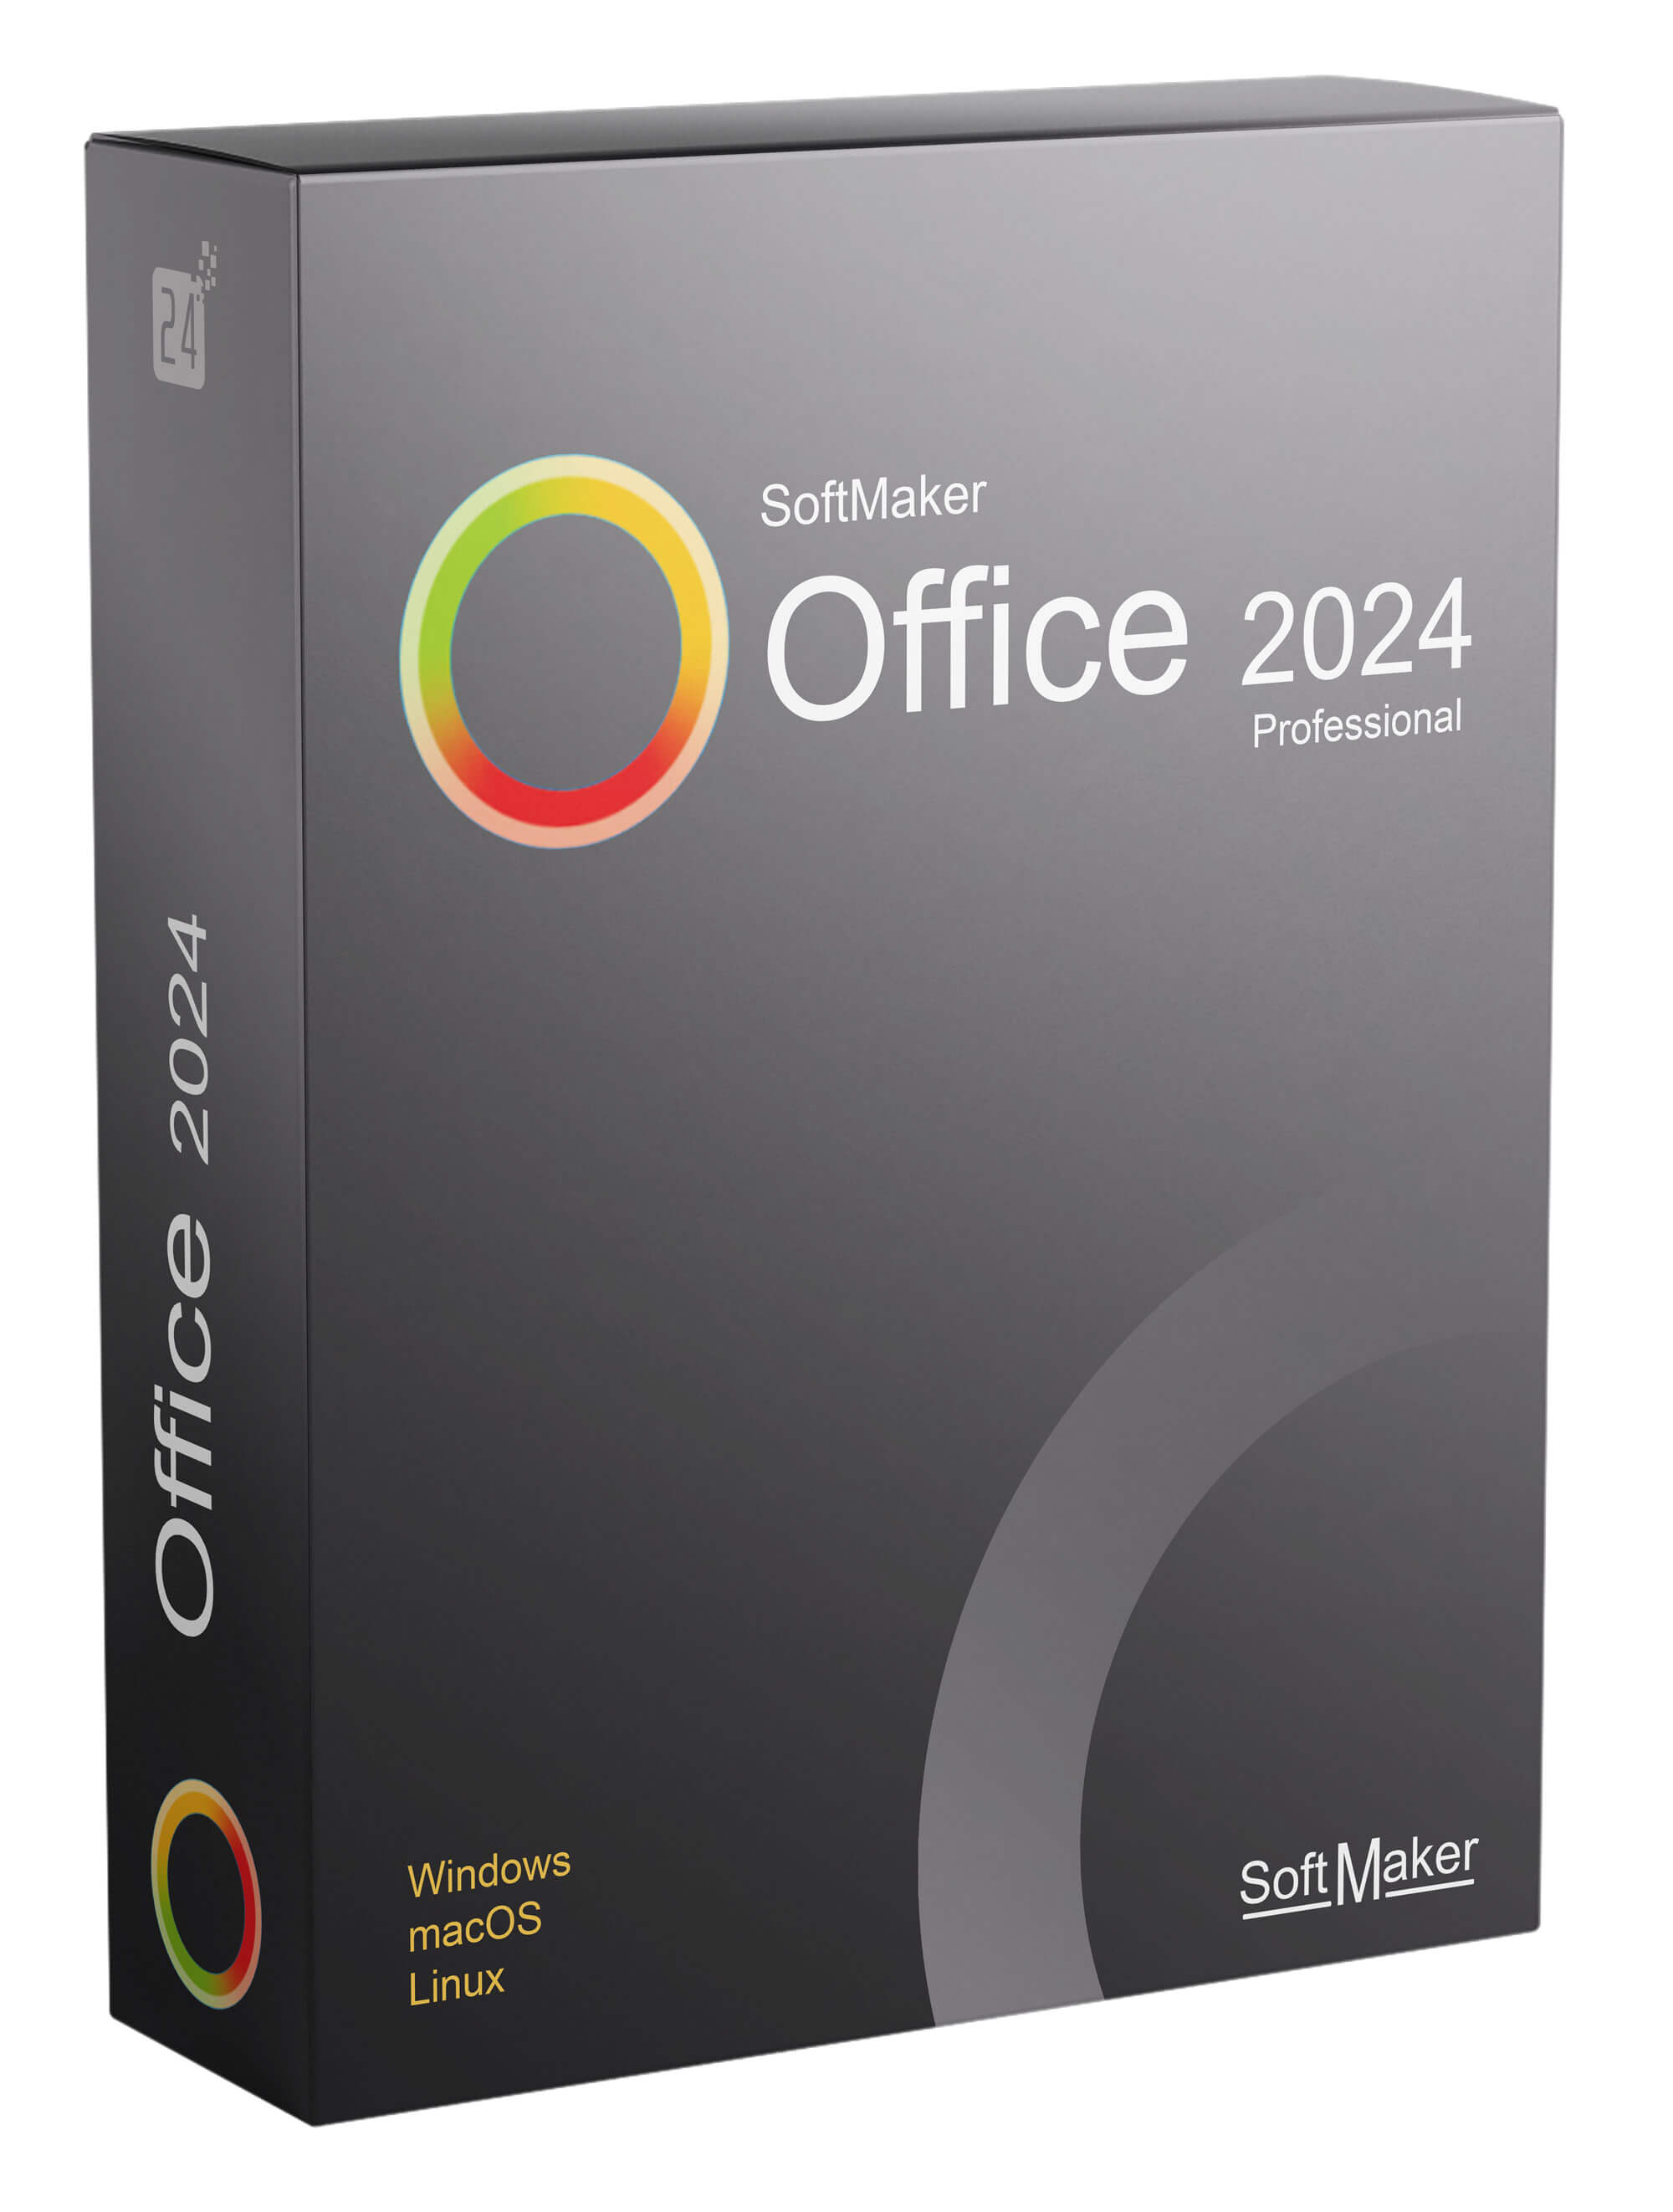 SoftMaker Office Professional 2024 rev.1204.0902 download the new for windows